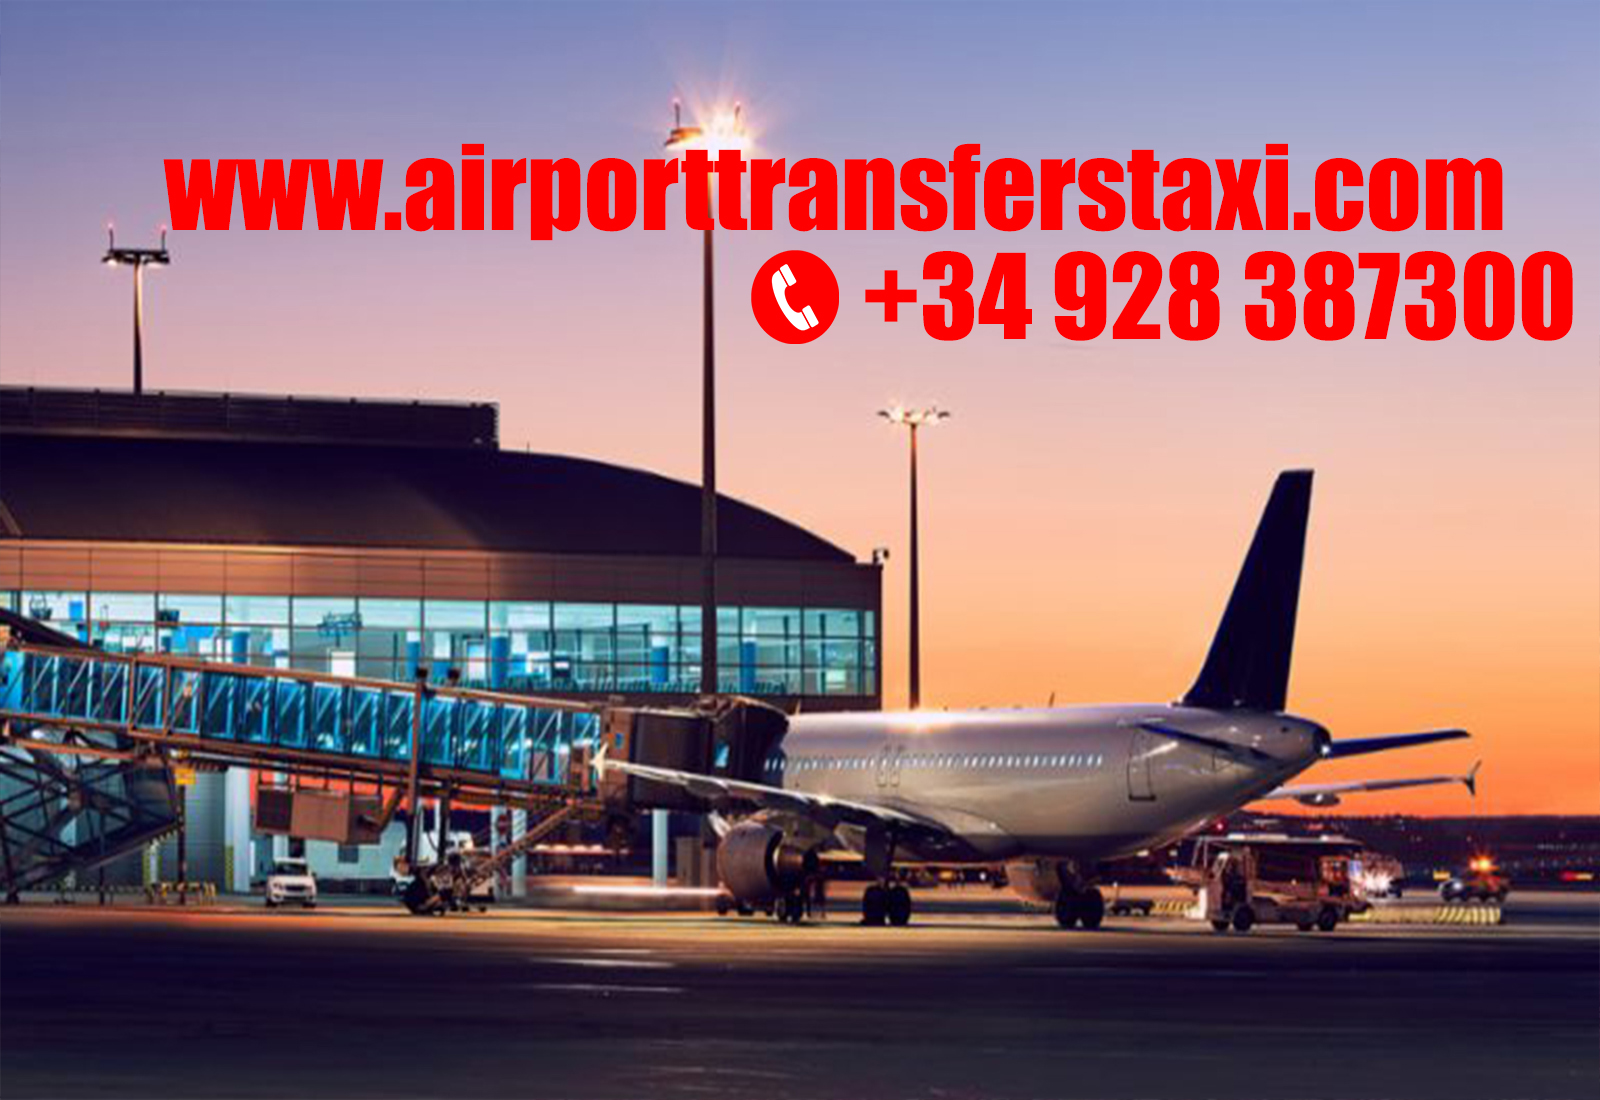 Airport Transfers Taxis Canary Islands